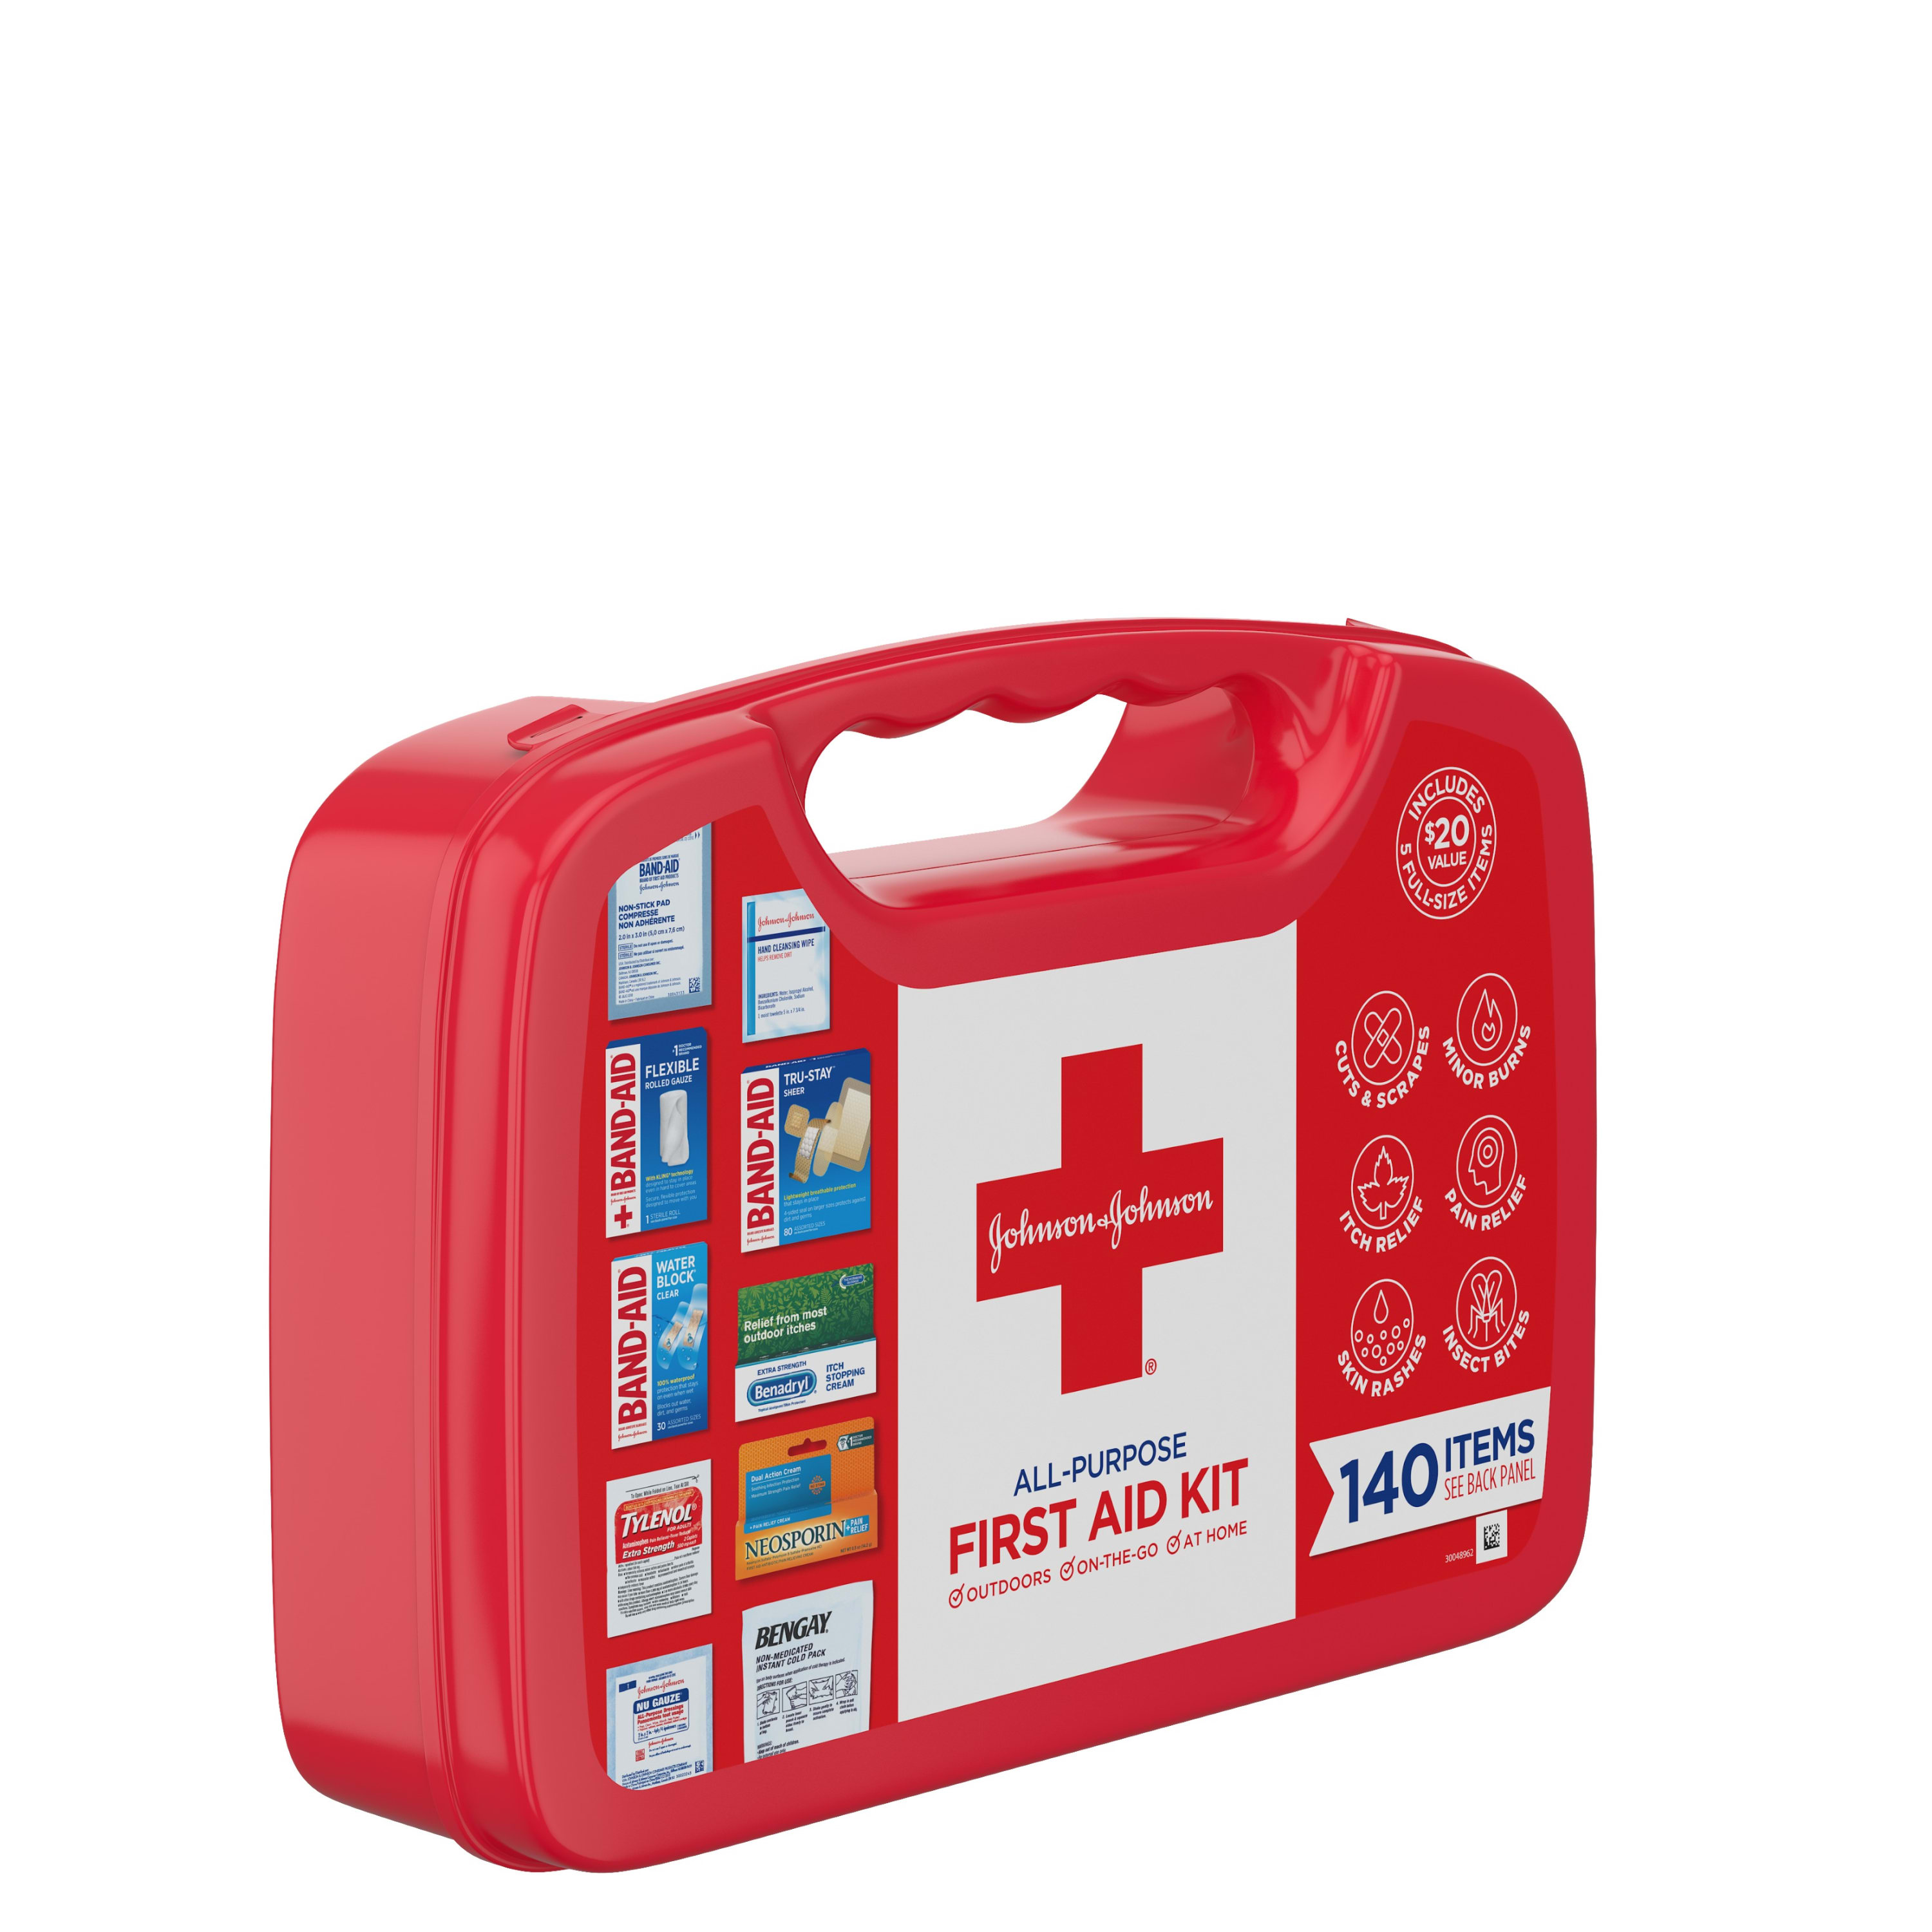 Johnson & Johnson All-Purpose Portable Compact First Aid Kit, 140 pc - image 4 of 11